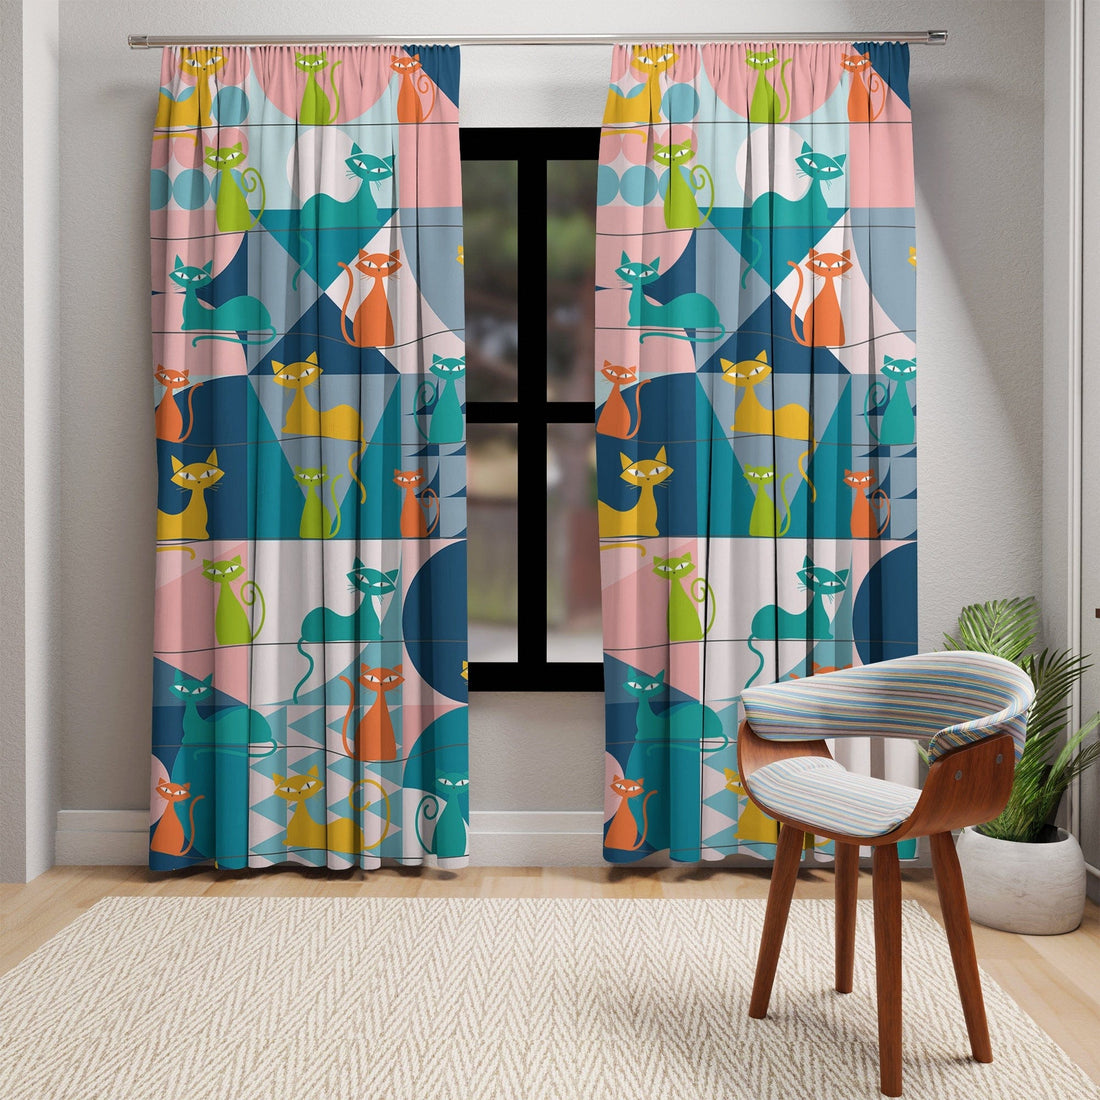 Kate McEnroe New York Mid Century Modern Atomic Kitschy Cats Window Curtain in Geometric Retro Teal, Pink, Orange, and Yellow, Sheer &amp; Blackout MCM Window PanelsWindow CurtainsW3D - COL - CAT - SH6